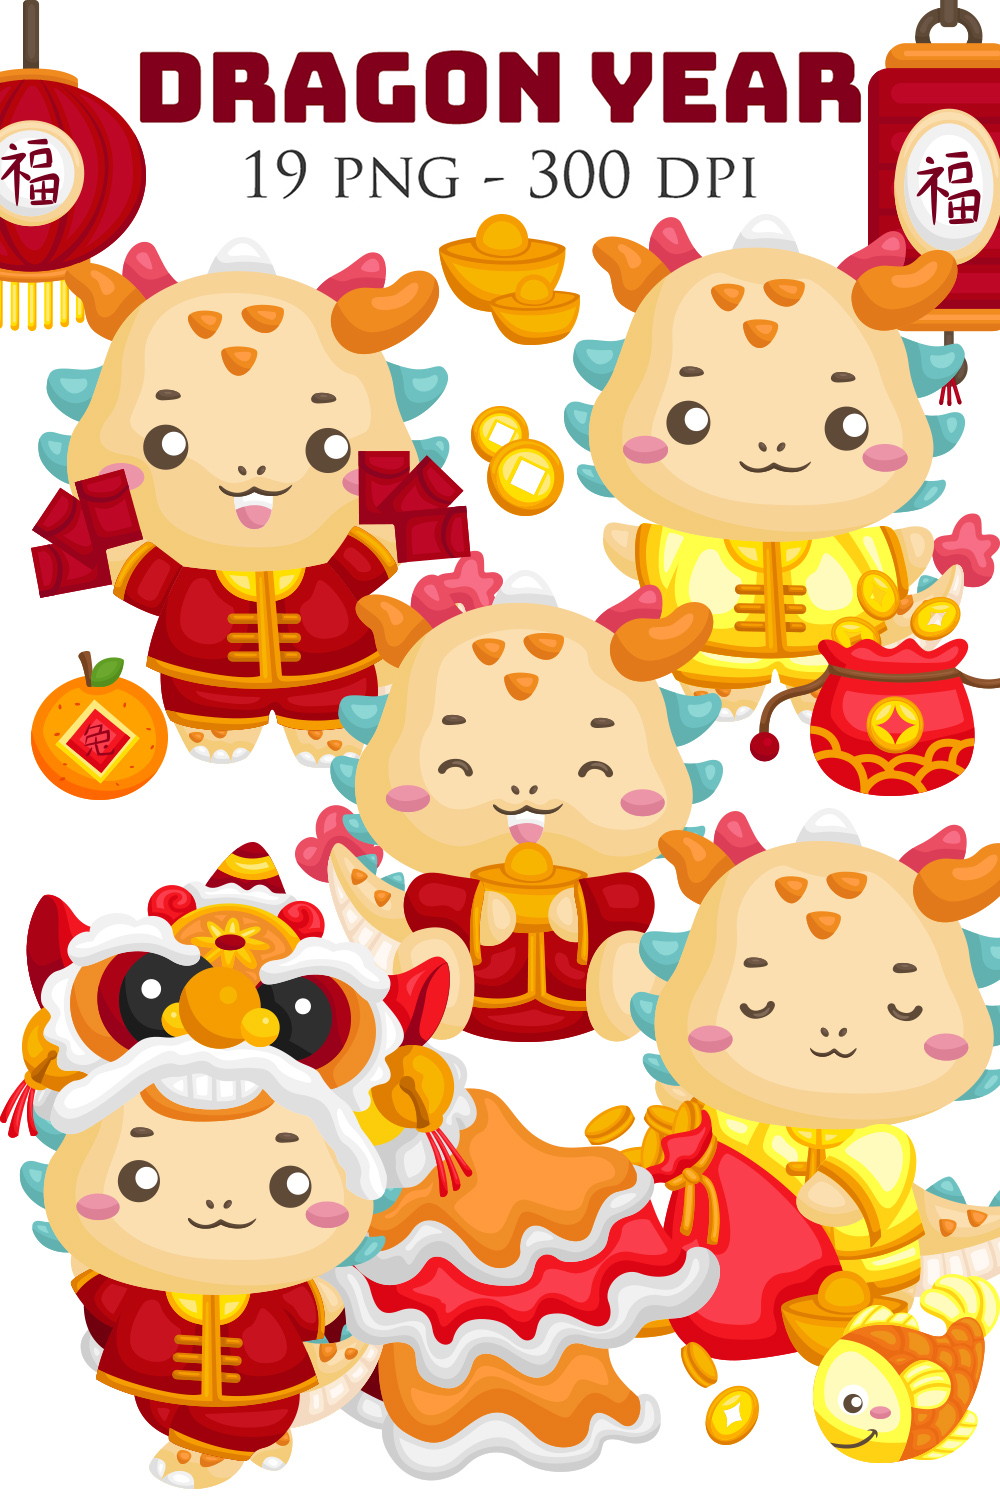 Cute Chinese New Year Lunar Celebration Dragon Year Decoration Background Illustration Vector Clipart Sticker Cartoon Accessories Ornaments pinterest preview image.